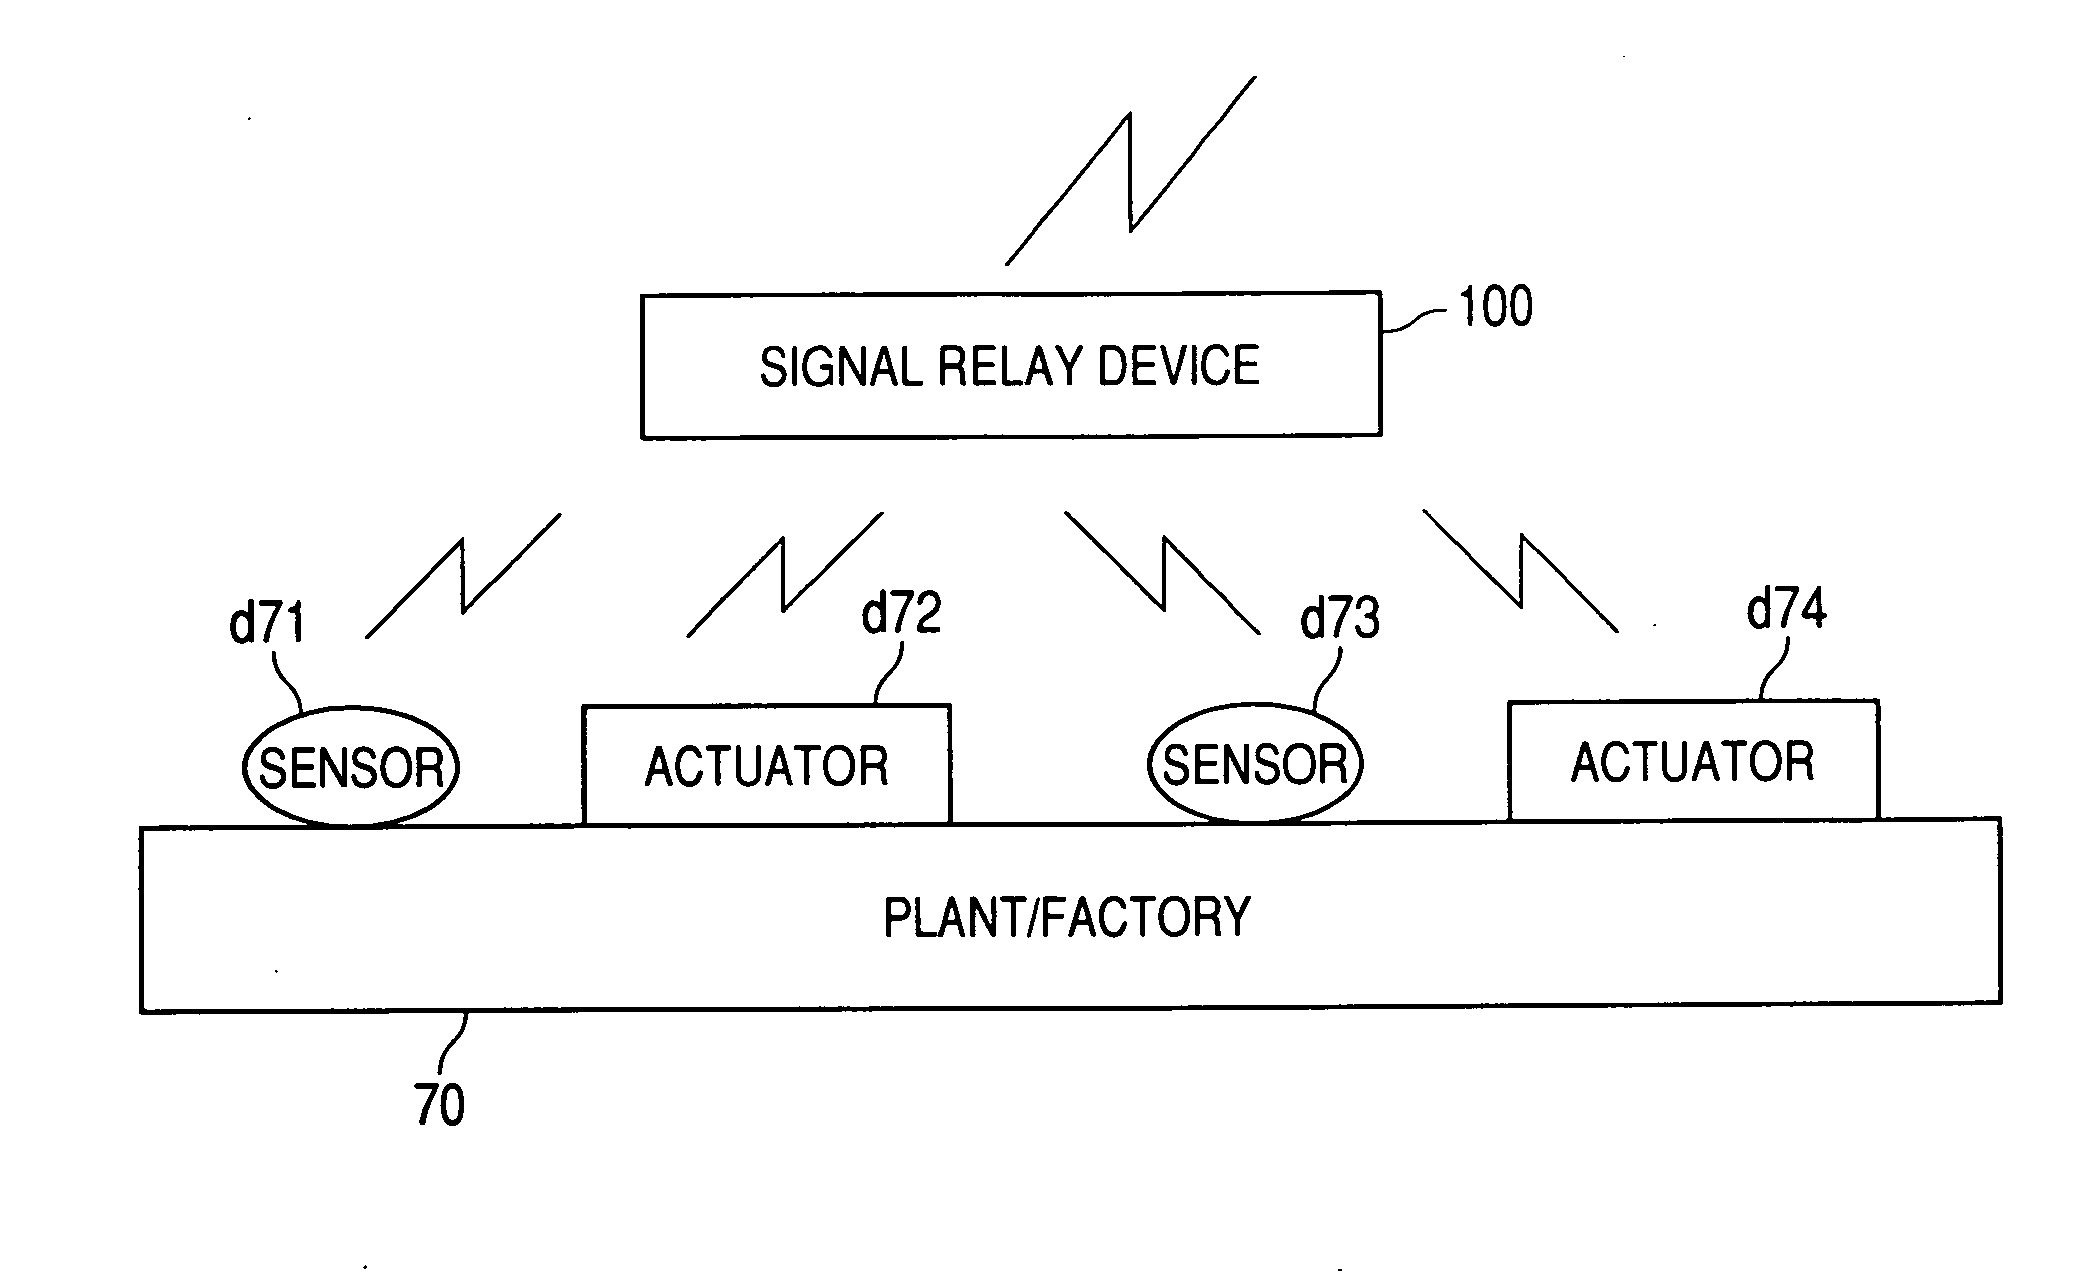 Signal relay device, communication network system and operation system